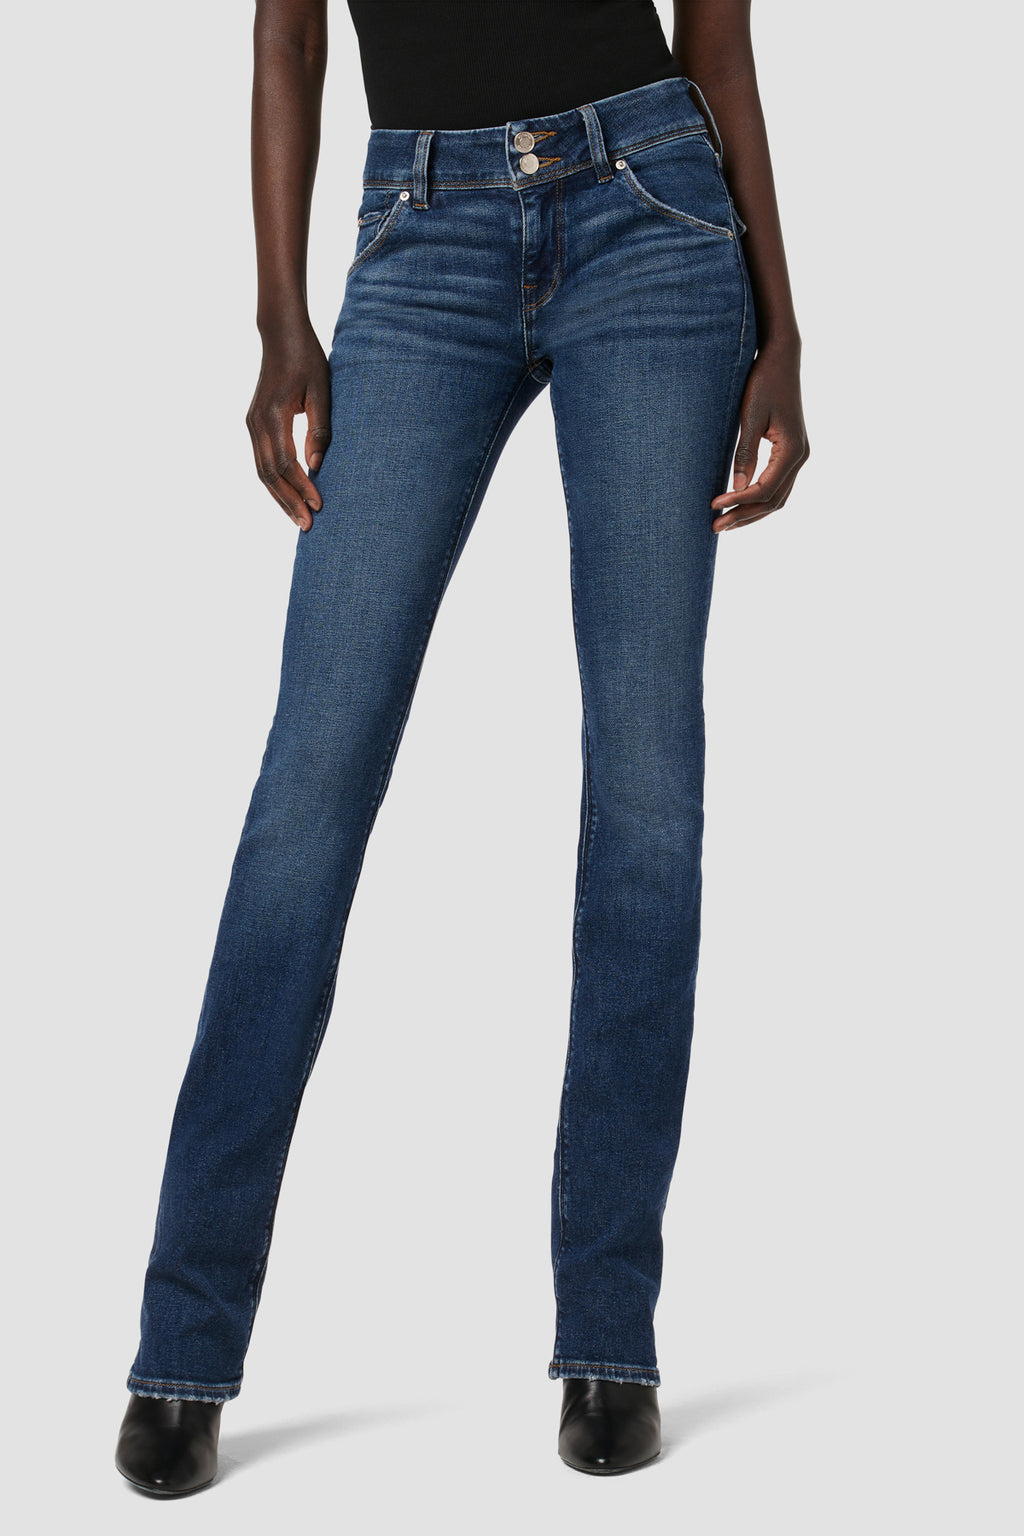 Hudson Jeans Women's Collin Midrise Skinny Flap Pocket Jean, Maxson, 25 :  : Clothing, Shoes & Accessories